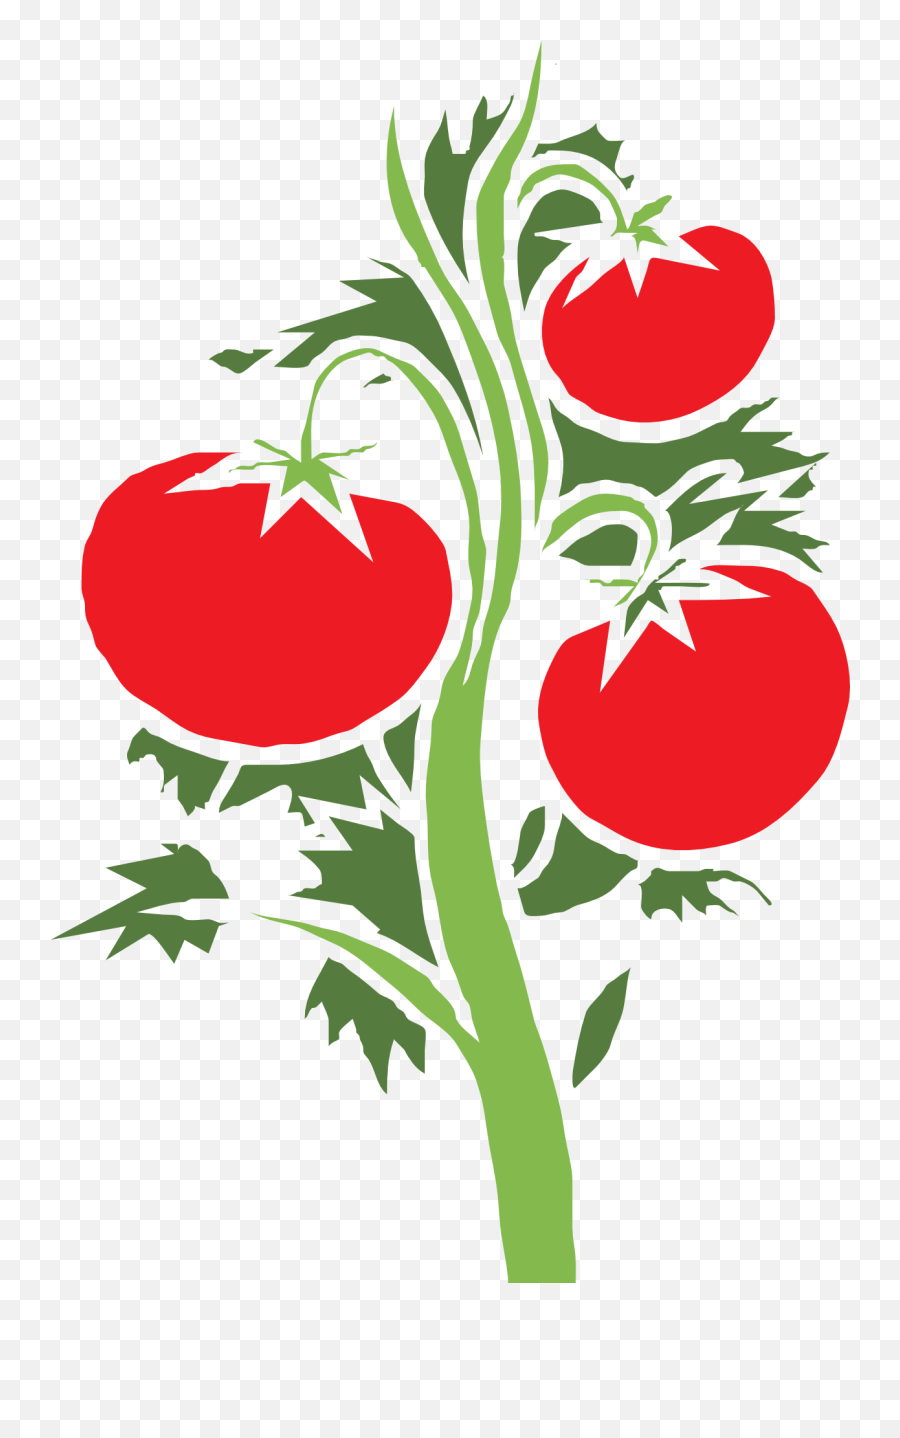 Clipart Of Ripe Tomato Vegetables Free Image Download - Clipart Tomato Plant Emoji,Fruits And Vegetables Clipart